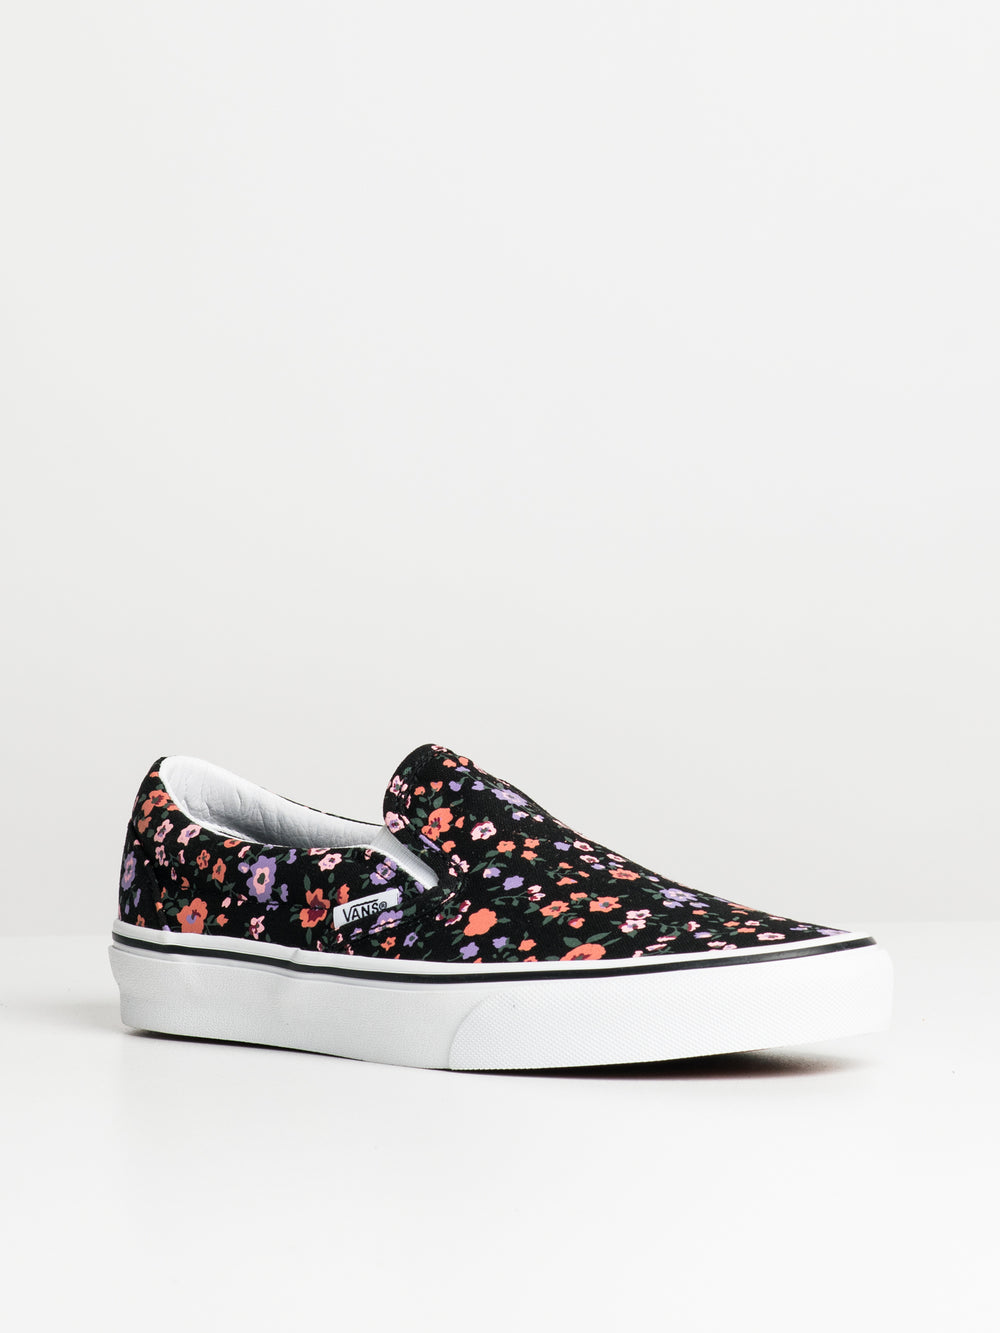 WOMENS VANS CLASSIC SLIP-ON FLORAL - CLEARANCE